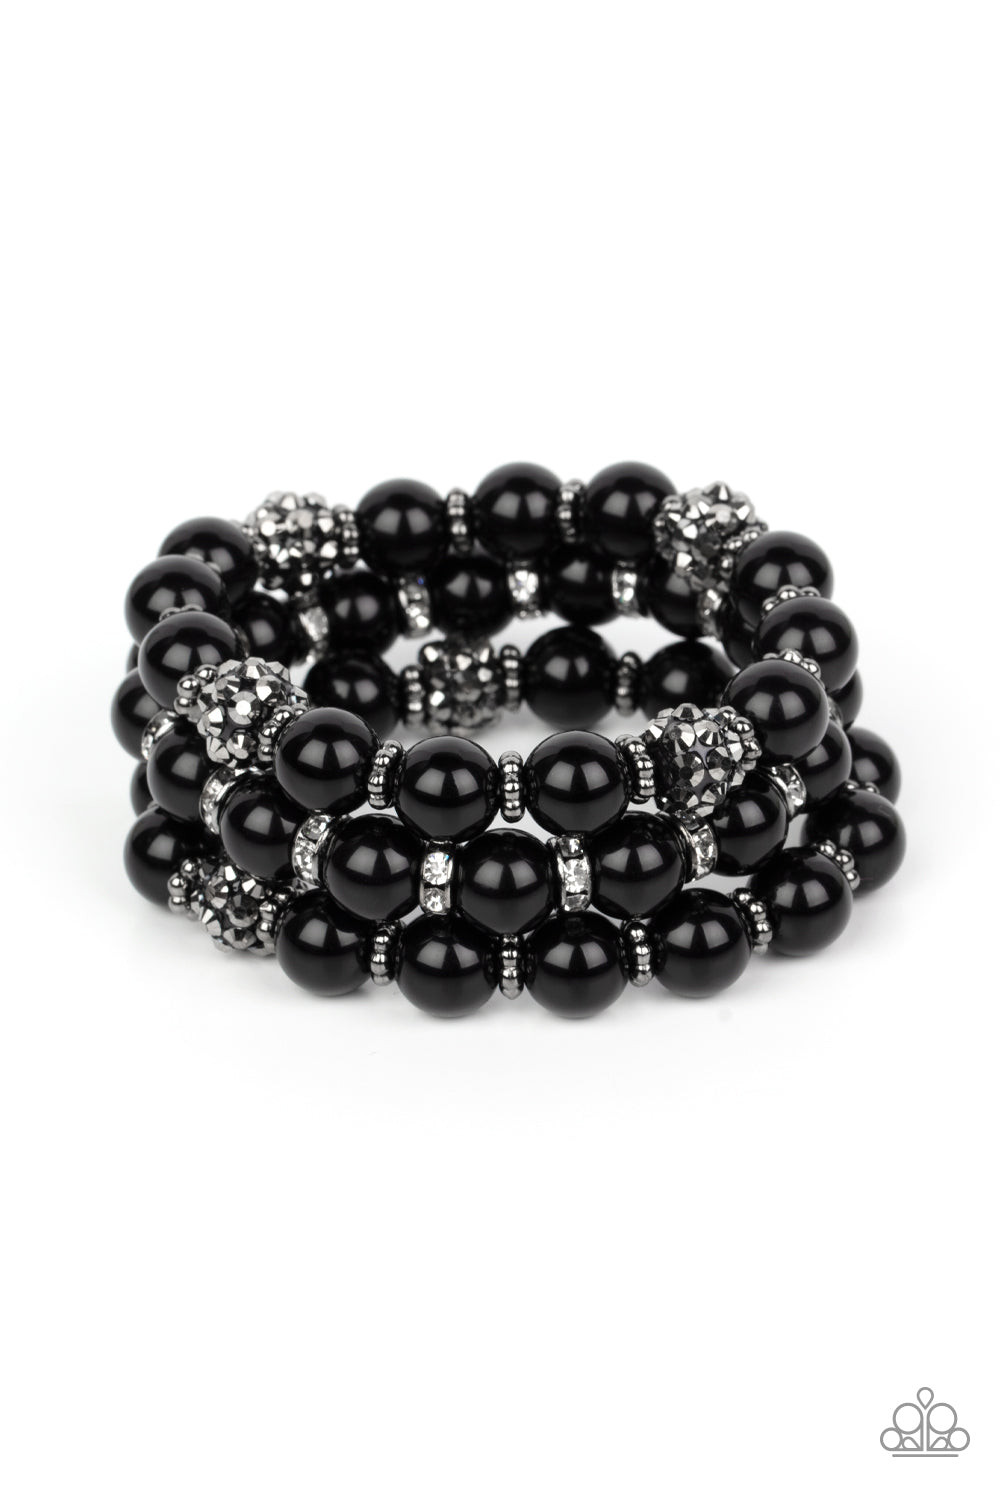 Poshly Packing - Black and Silver Bracelet  - Paparazzi Accessories Bejeweled Accessories By Kristie - Trendy fashion jewelry for everyone -